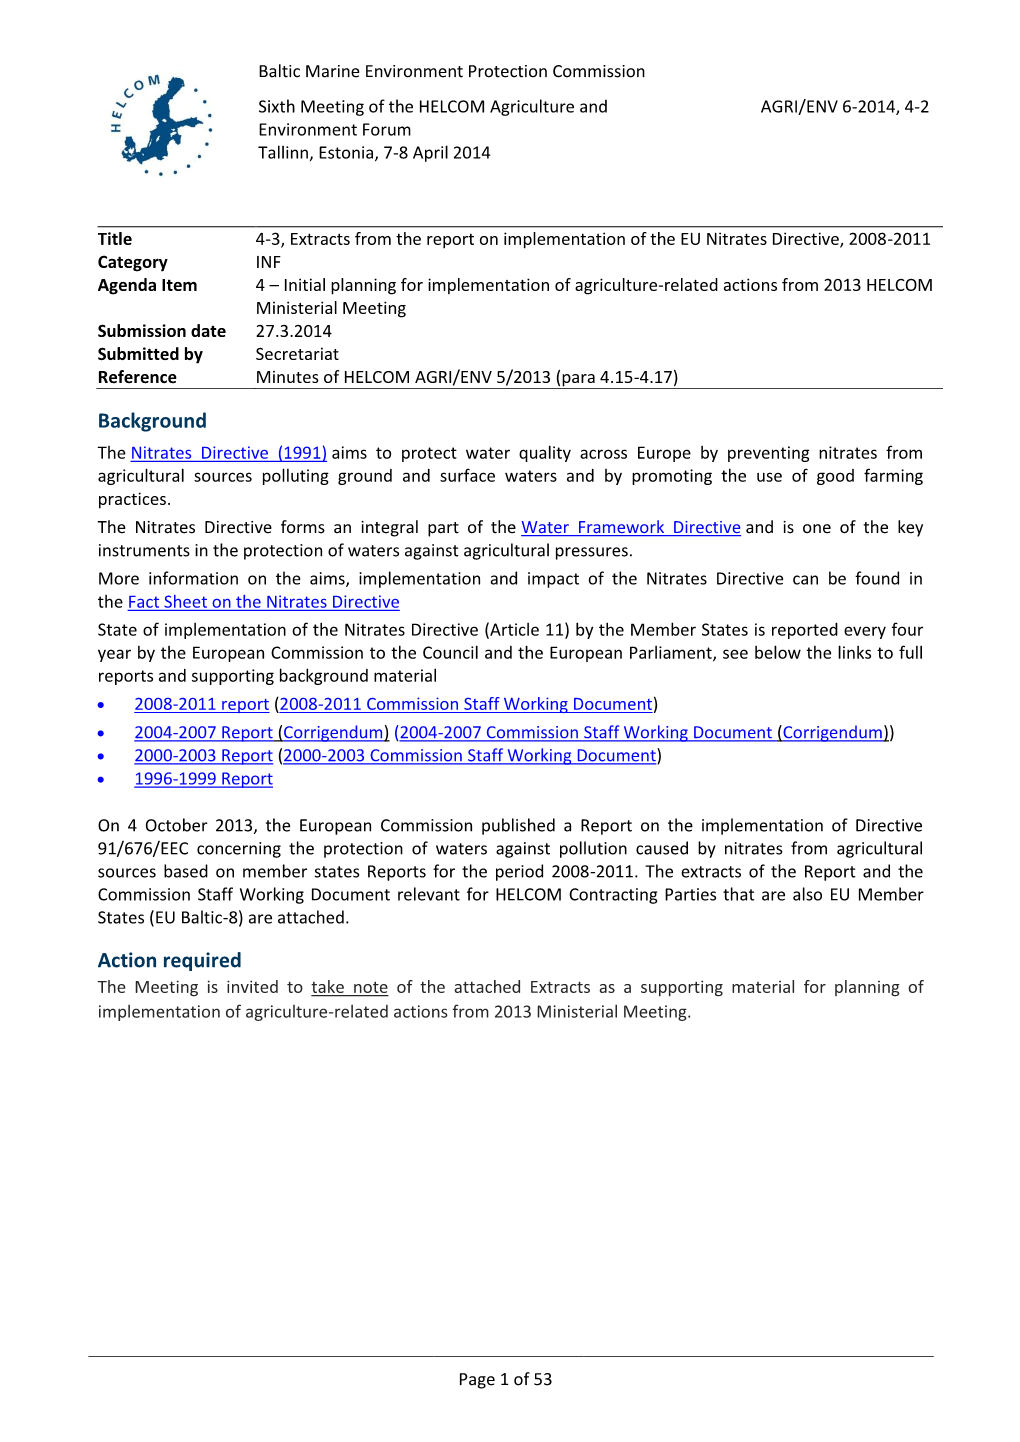 4-3 Extracts from the Report on Implementation of the EU Nitrates